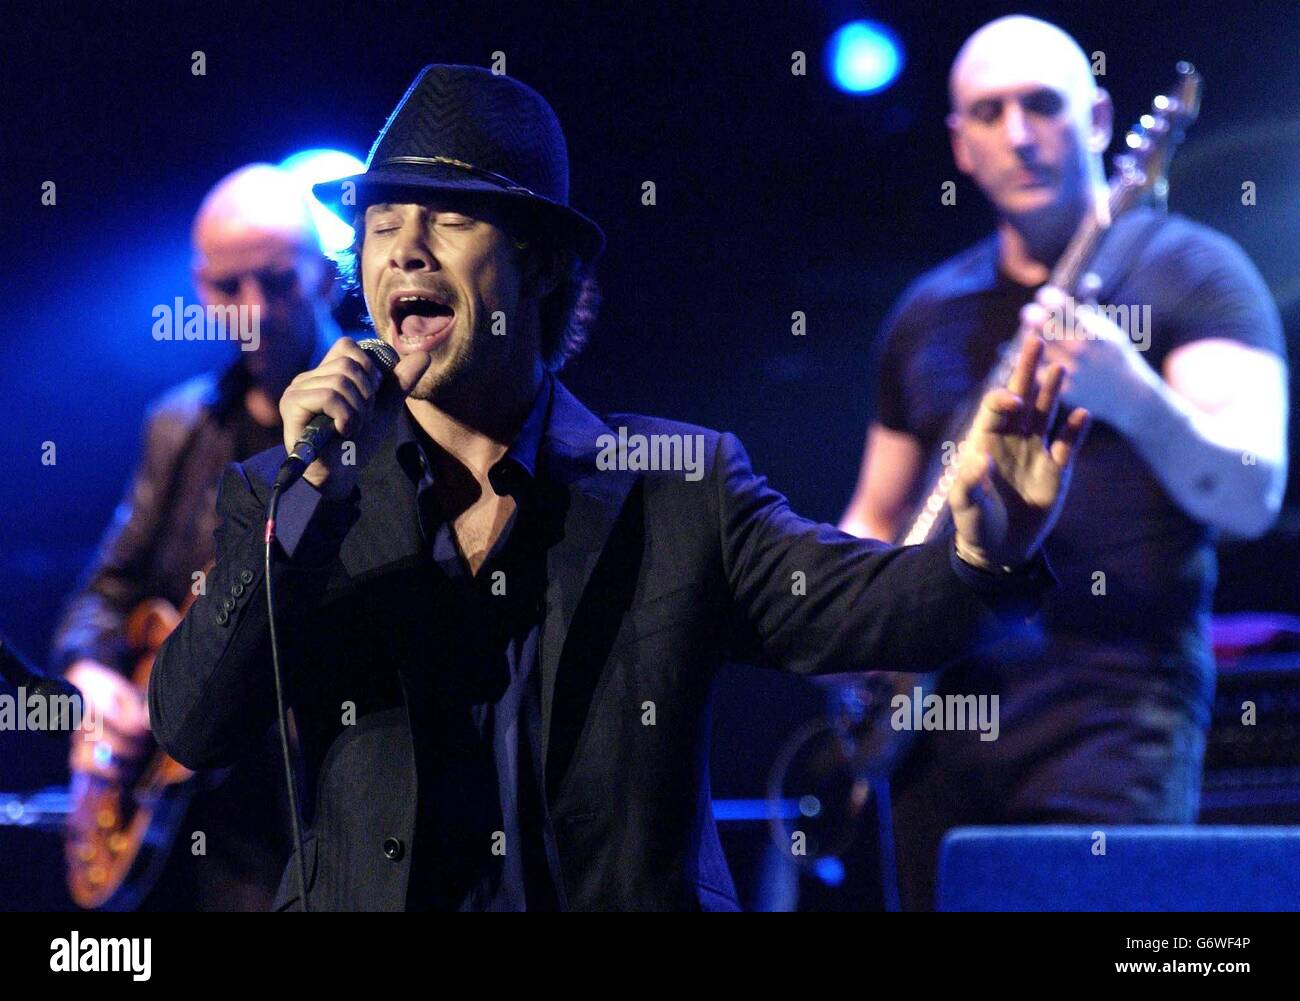 Singer Jay Kay from Jamiroquai performs live on stage during An Evening With Jools Holland, as part of the 'The Who And Friends' fundraising week of gigs, in aid of the Teenage Cancer Trust, at the Royal Albert Hall in London. Stock Photo